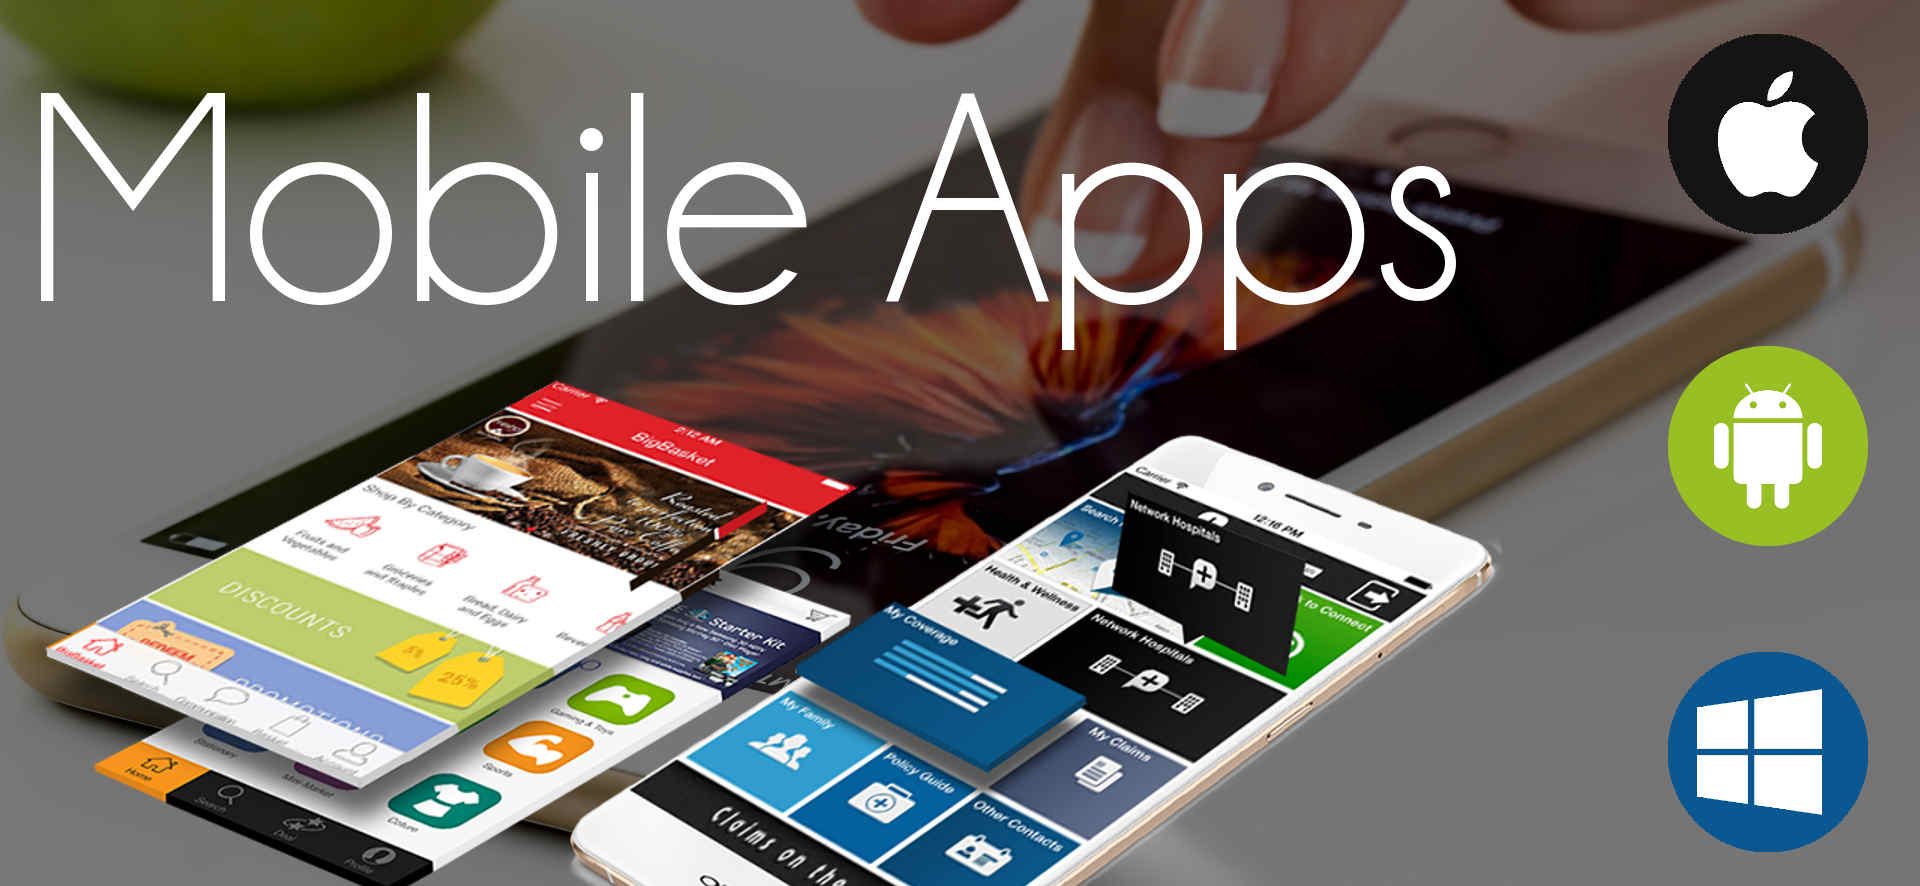 An Android Application Development Company can help you ensure your business success